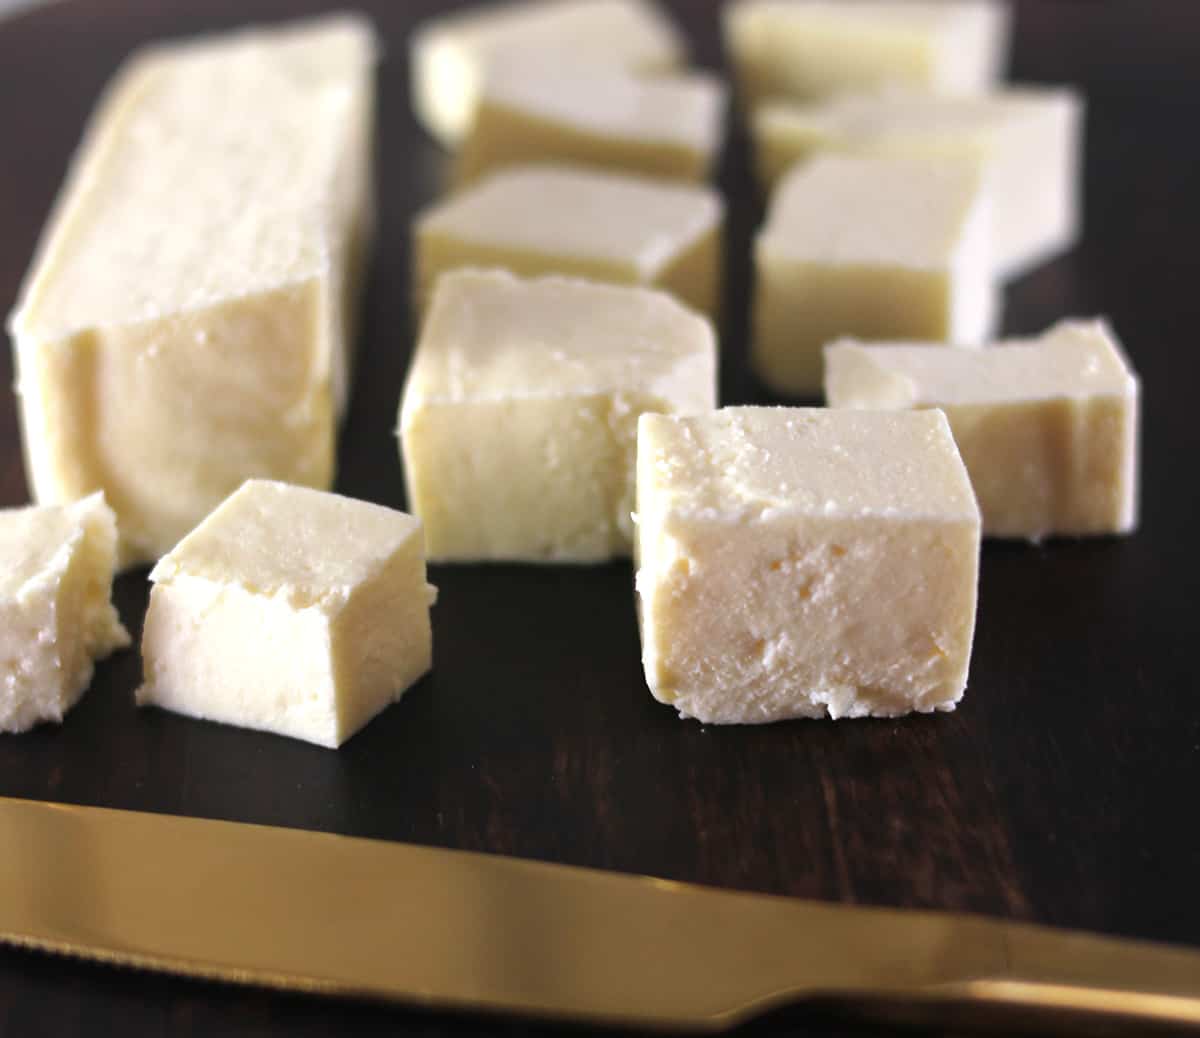 Fresh and soft paneer cubes made with milk (Homemade Indian cottage cheese).